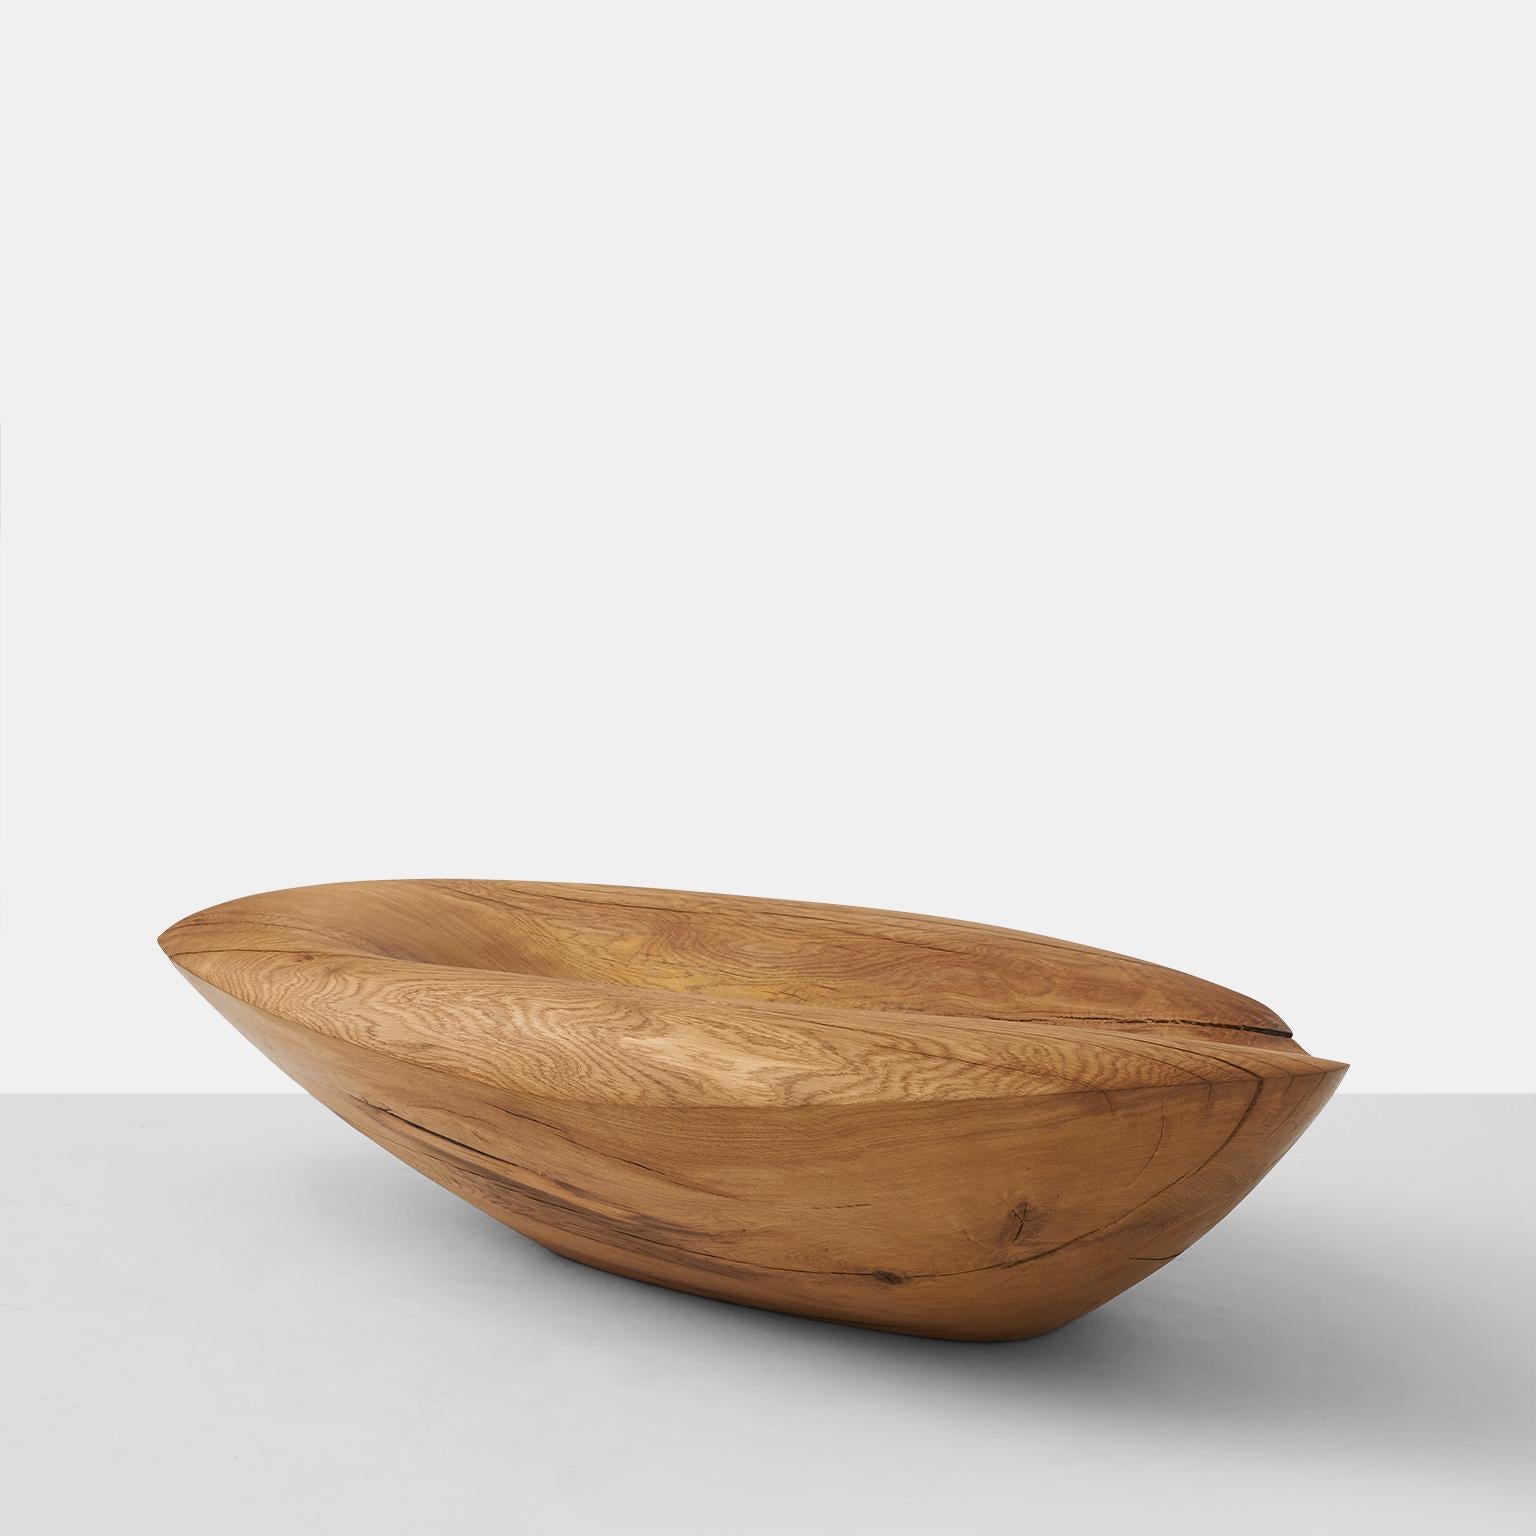 A handcrafted oak object by Kaspar Hamacher sculpted from a solid piece of oak. 